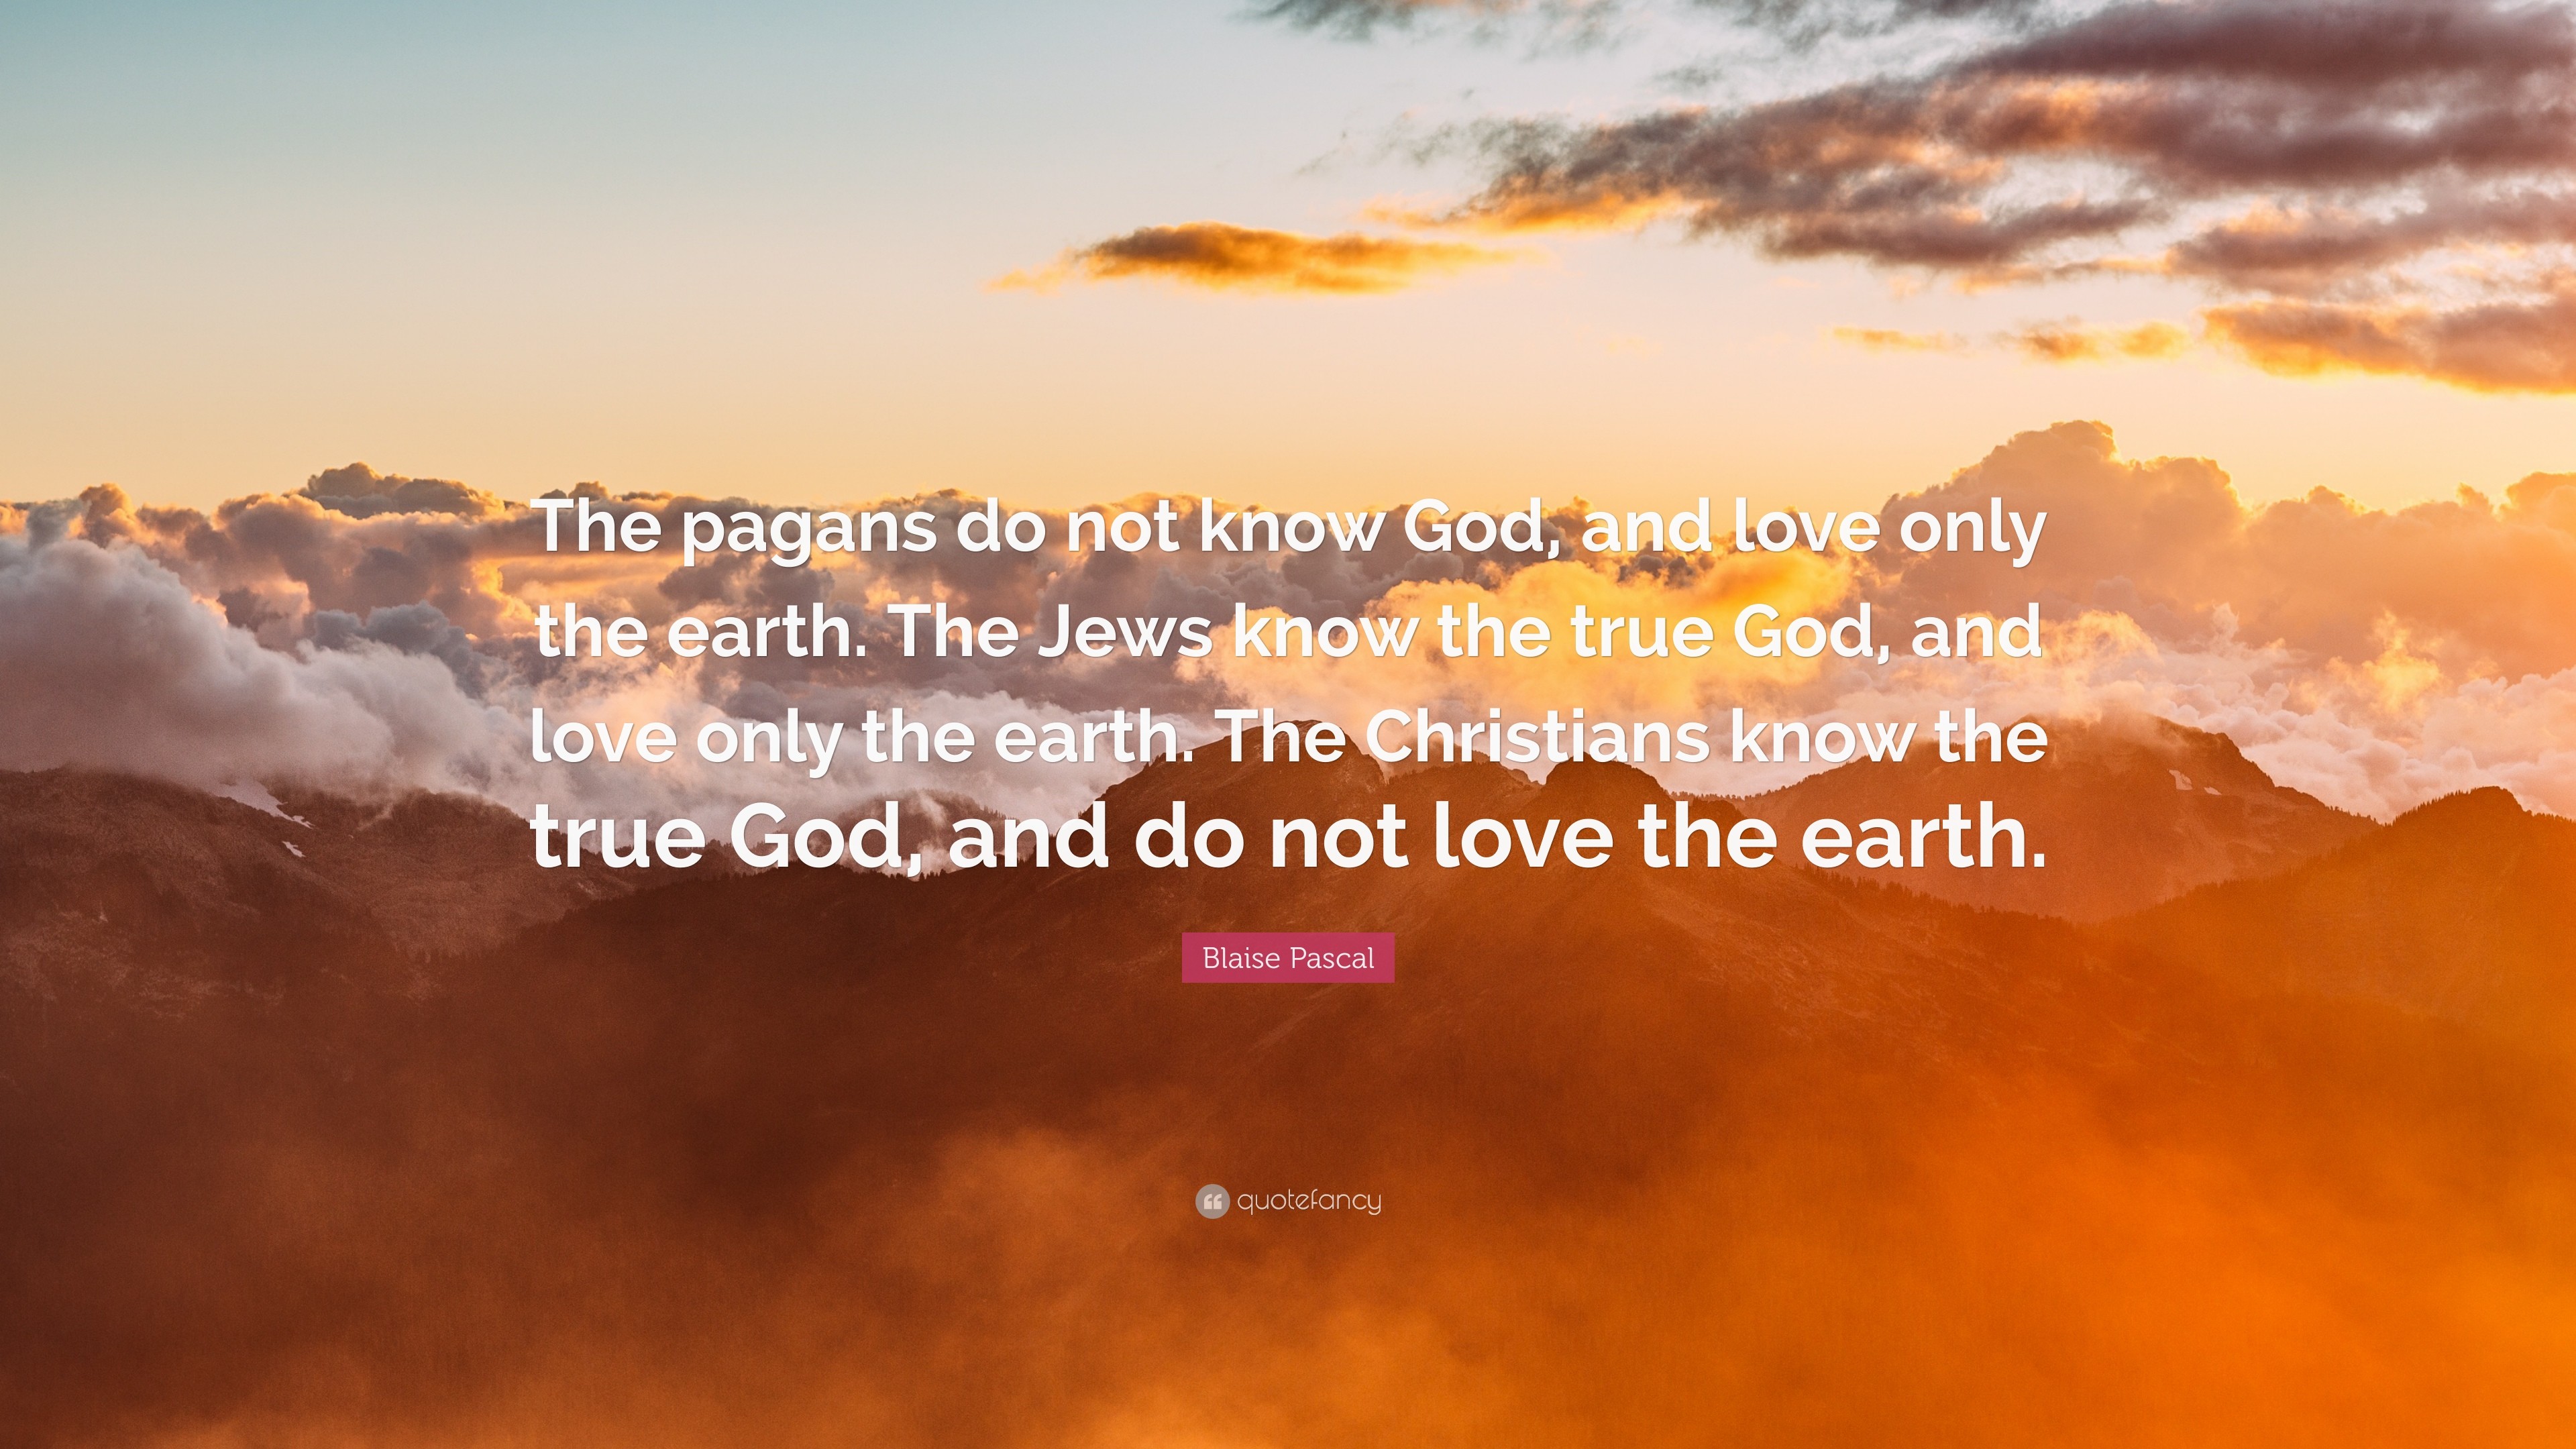 Blaise Pascal Quote: “The pagans do not know God, and love only the